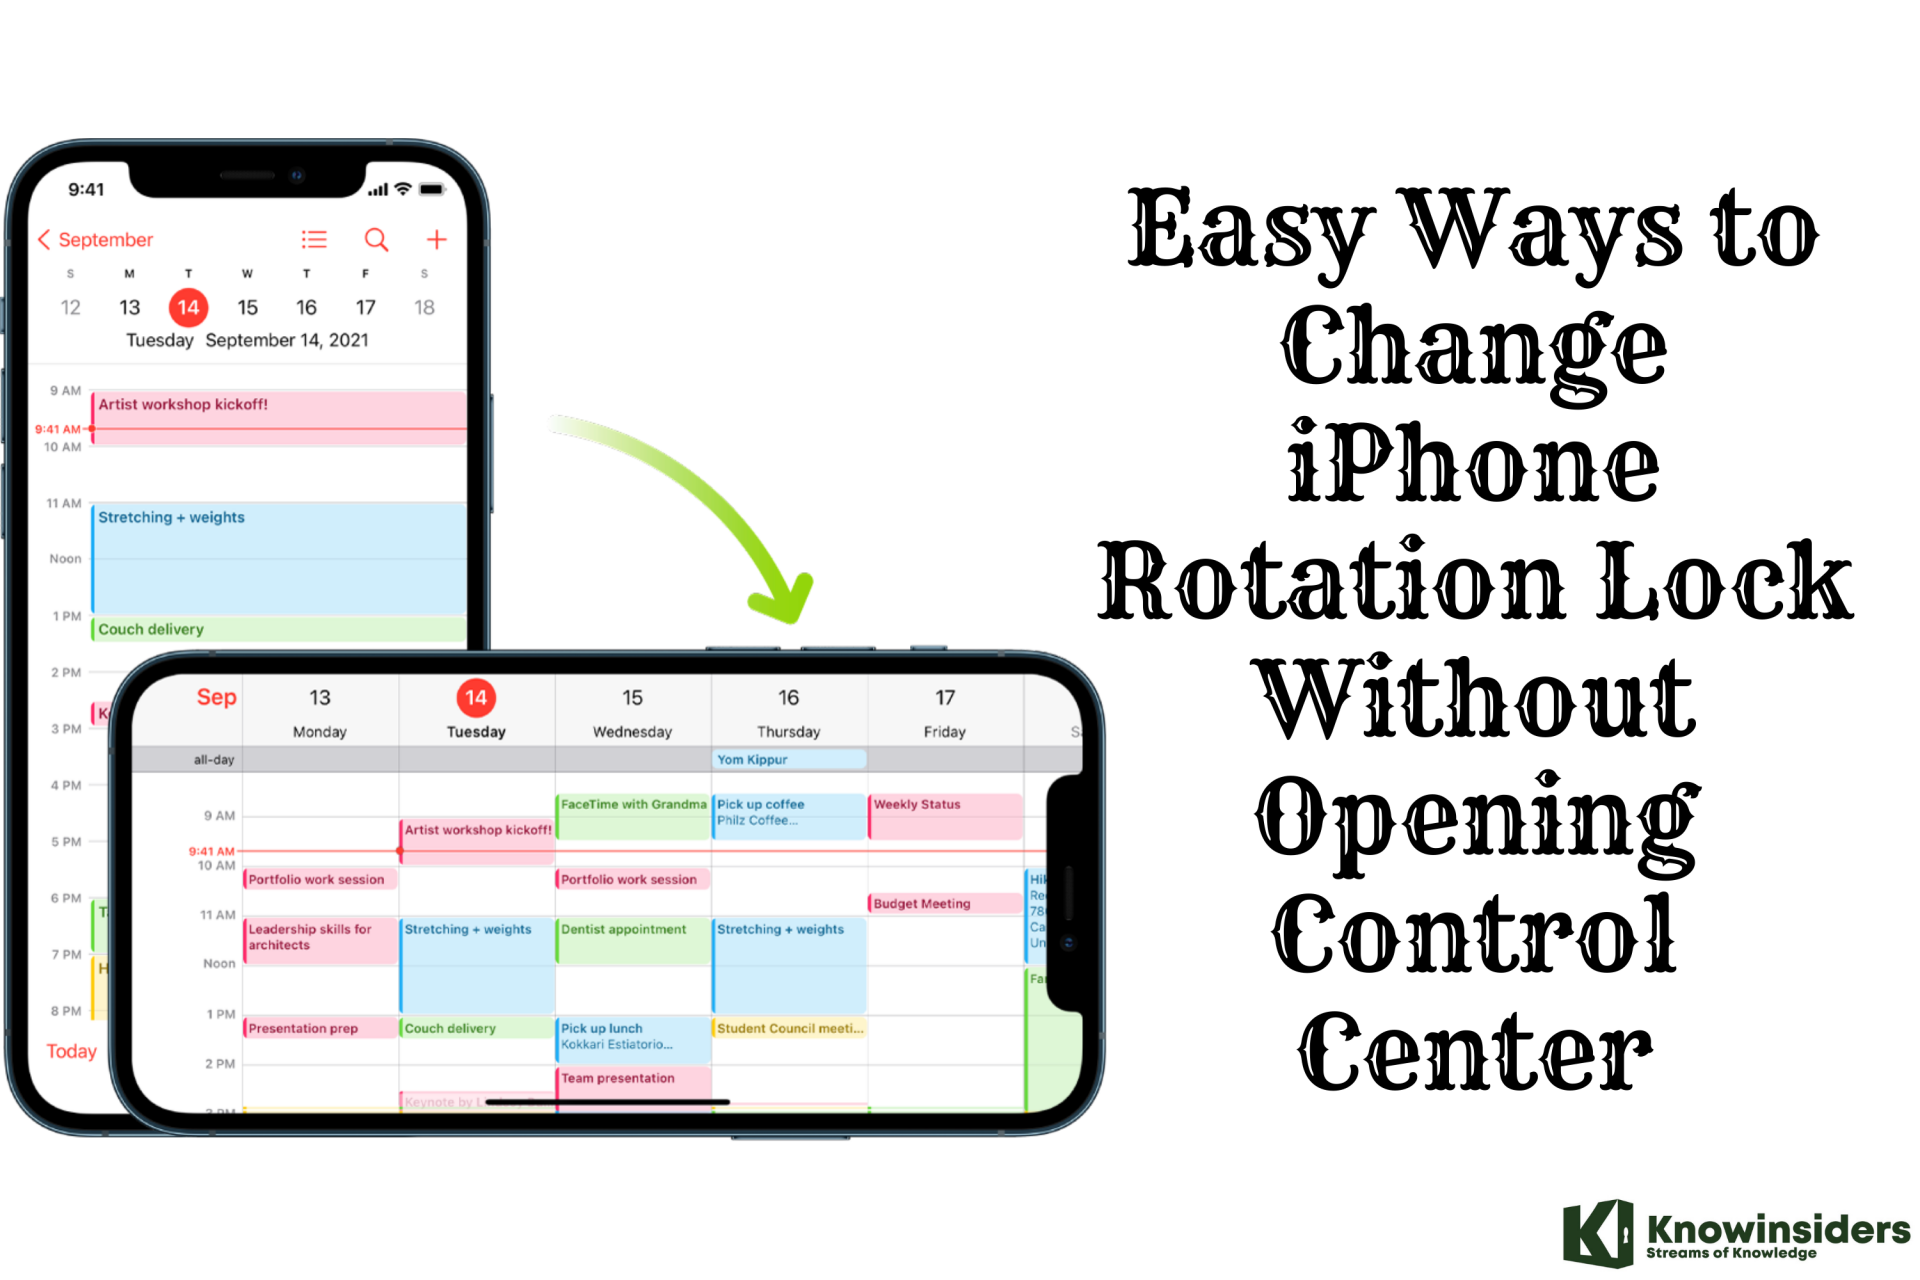 Easy Ways to Change iPhone Rotation Lock Without Opening Control Center